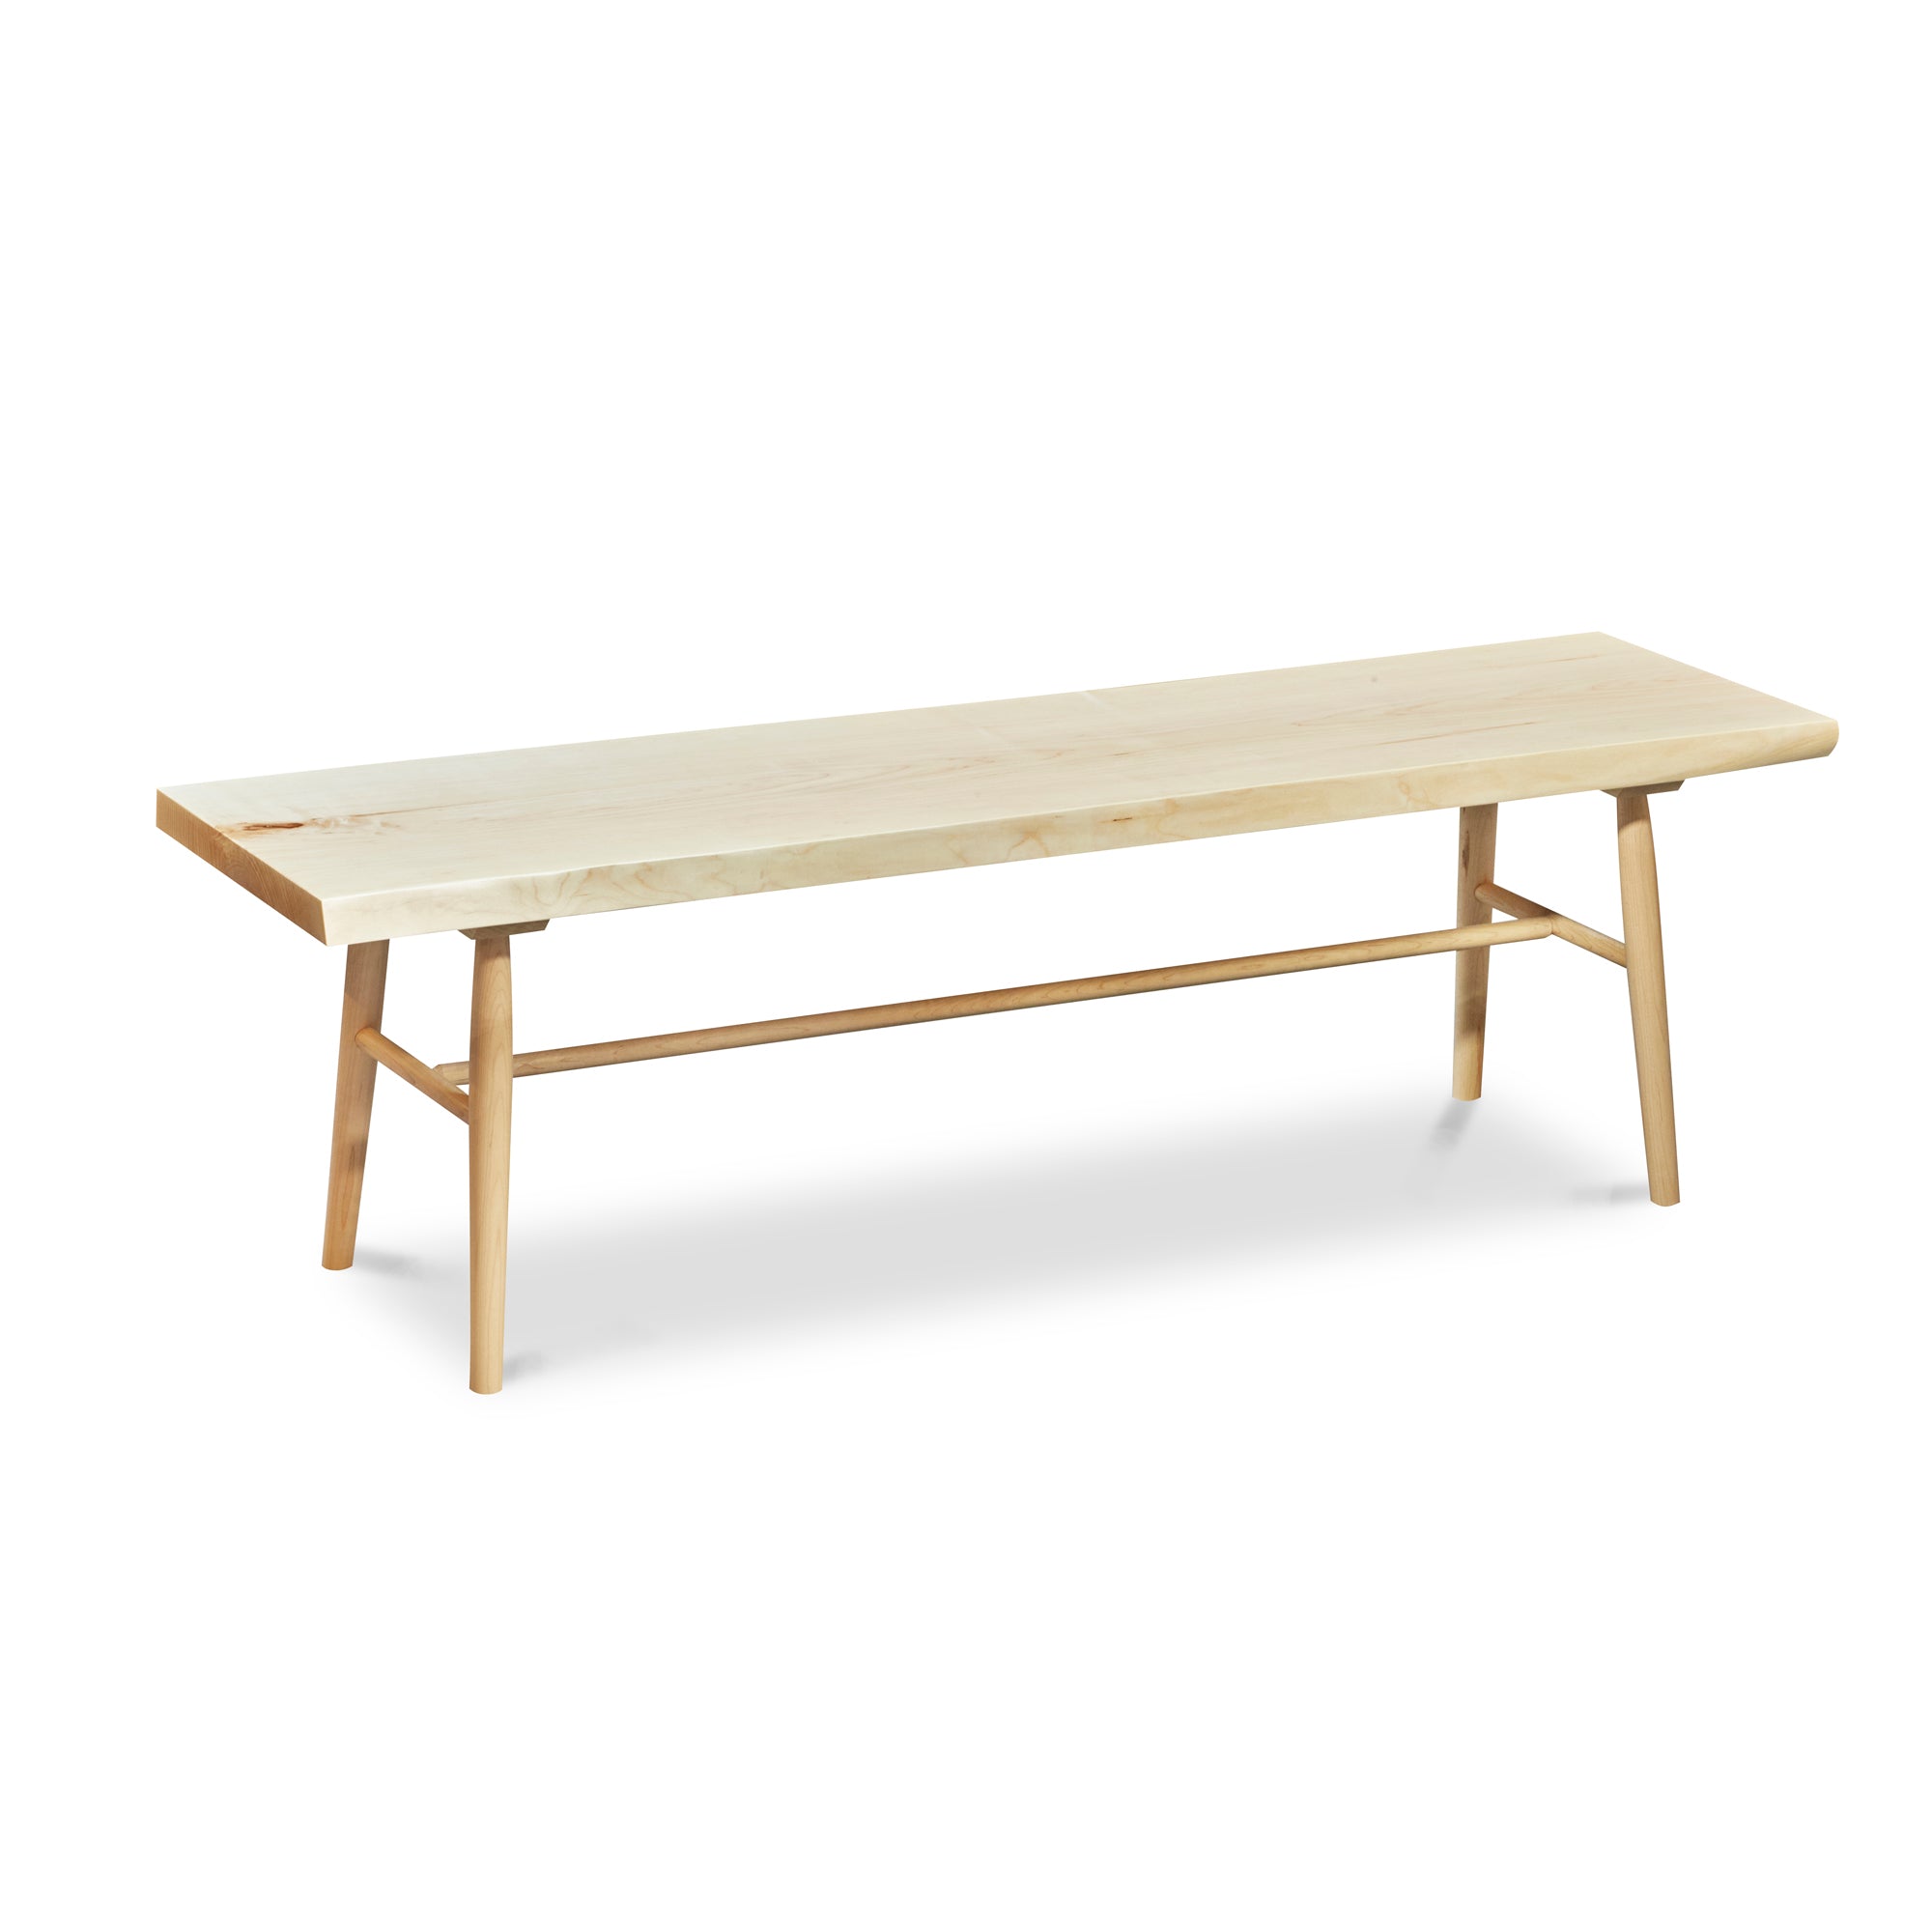 Hudson bench in maple with turned legs from Maine's Chilton Furniture Co.